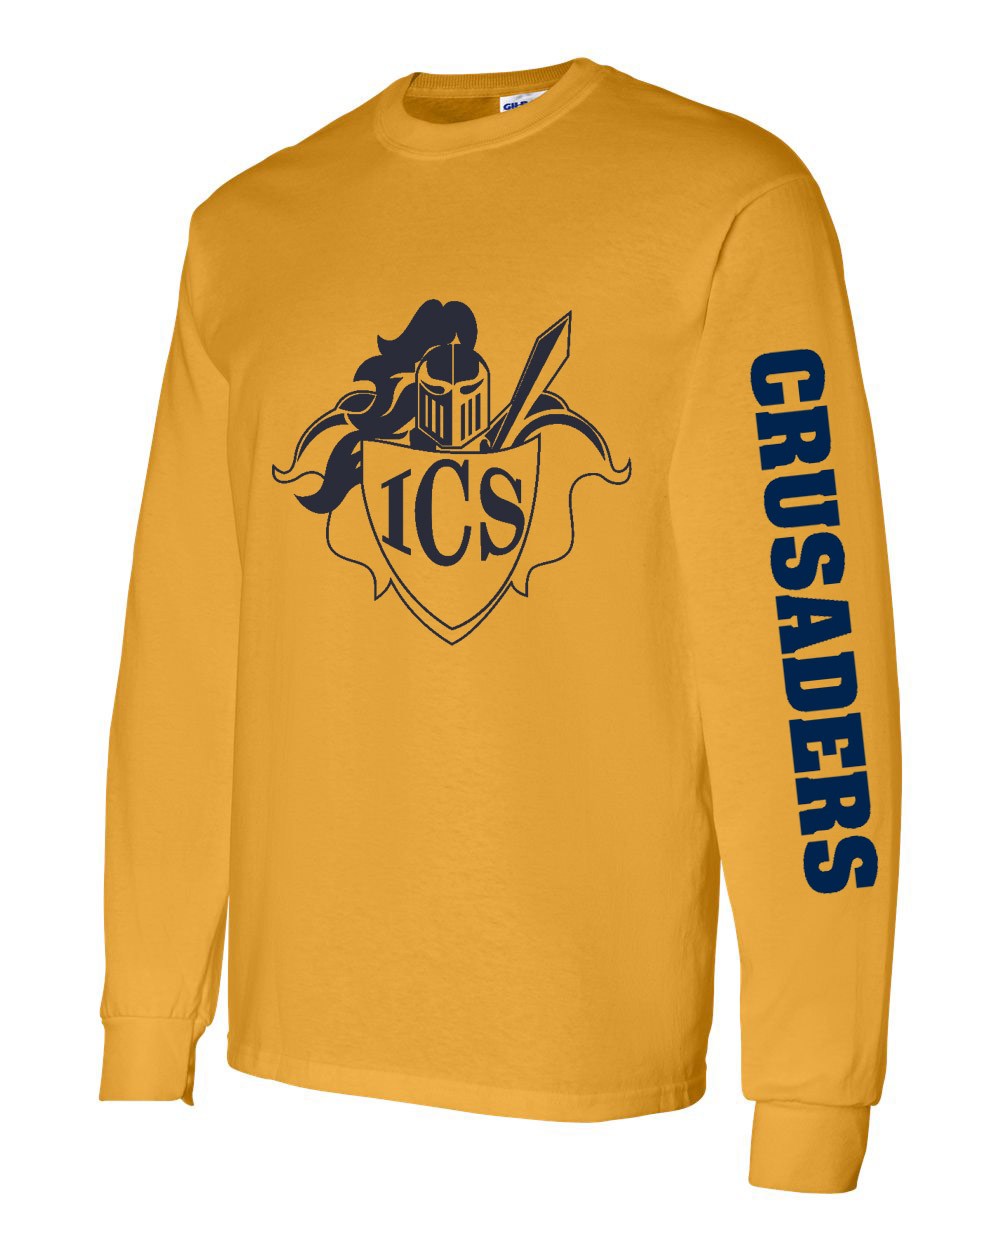 ICS Staff L/S T-Shirt w/ Navy Logo - Please Allow 2-3 Weeks for Delivery